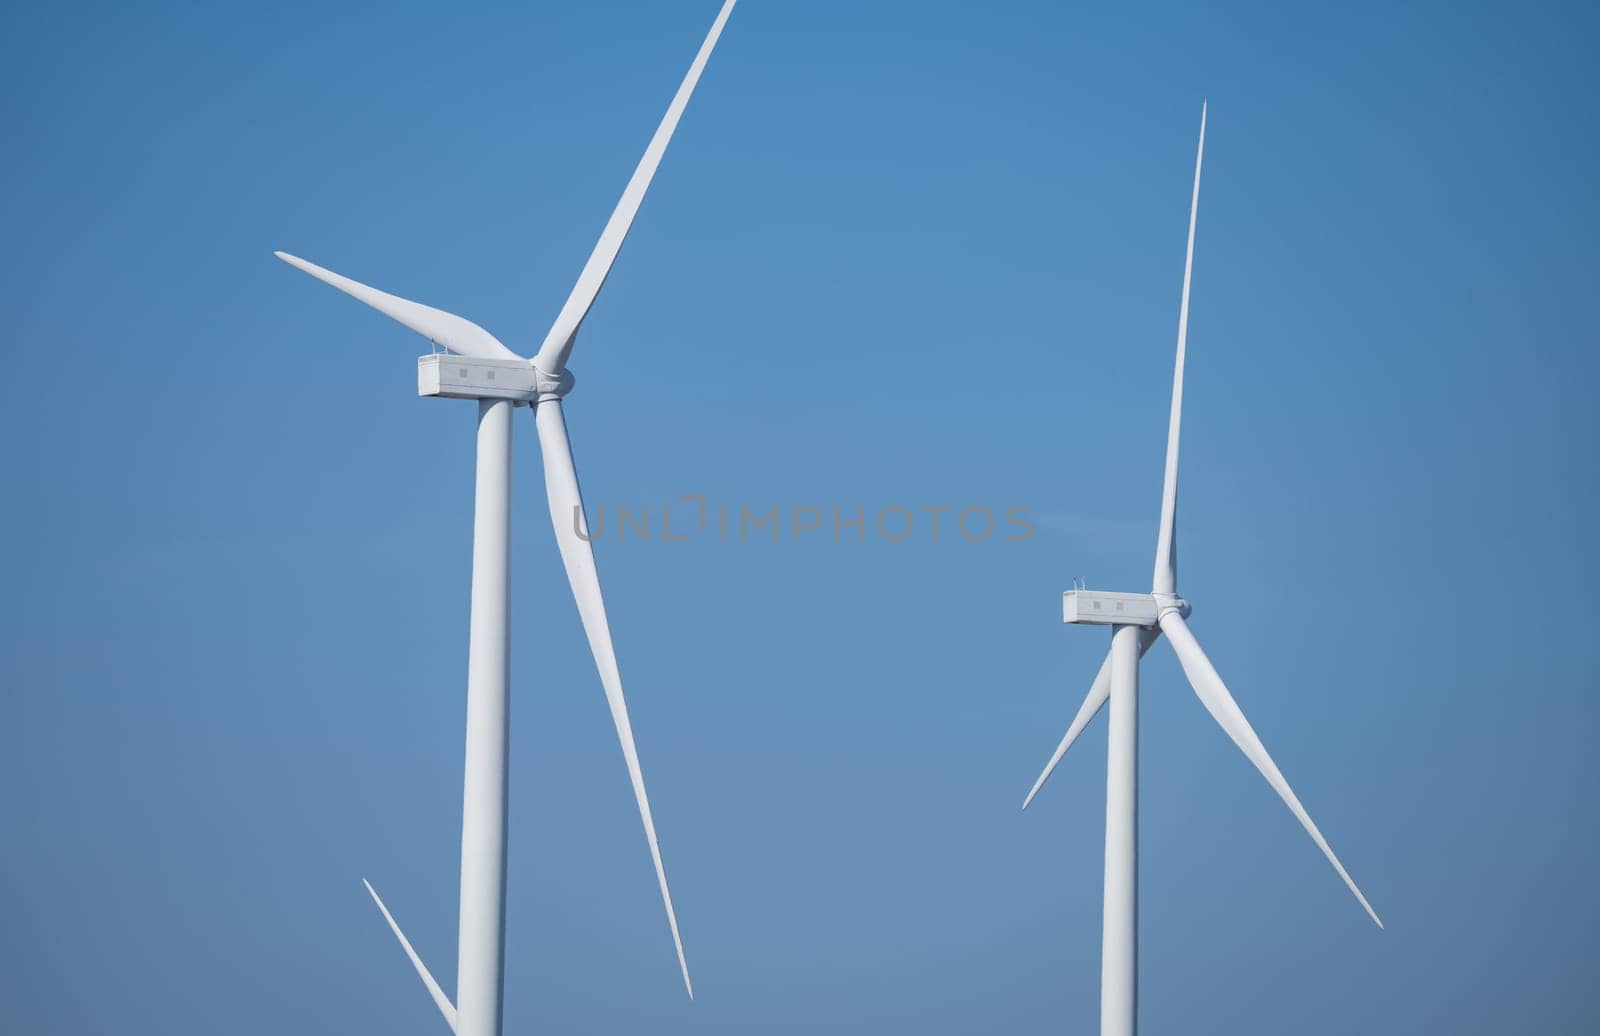 Wind energy. Wind power. Sustainable, renewable energy. Wind turbines generate electricity. Wind farm. Sustainable resources. Sustainable development. Green technology for energy sustainability. by Fahroni